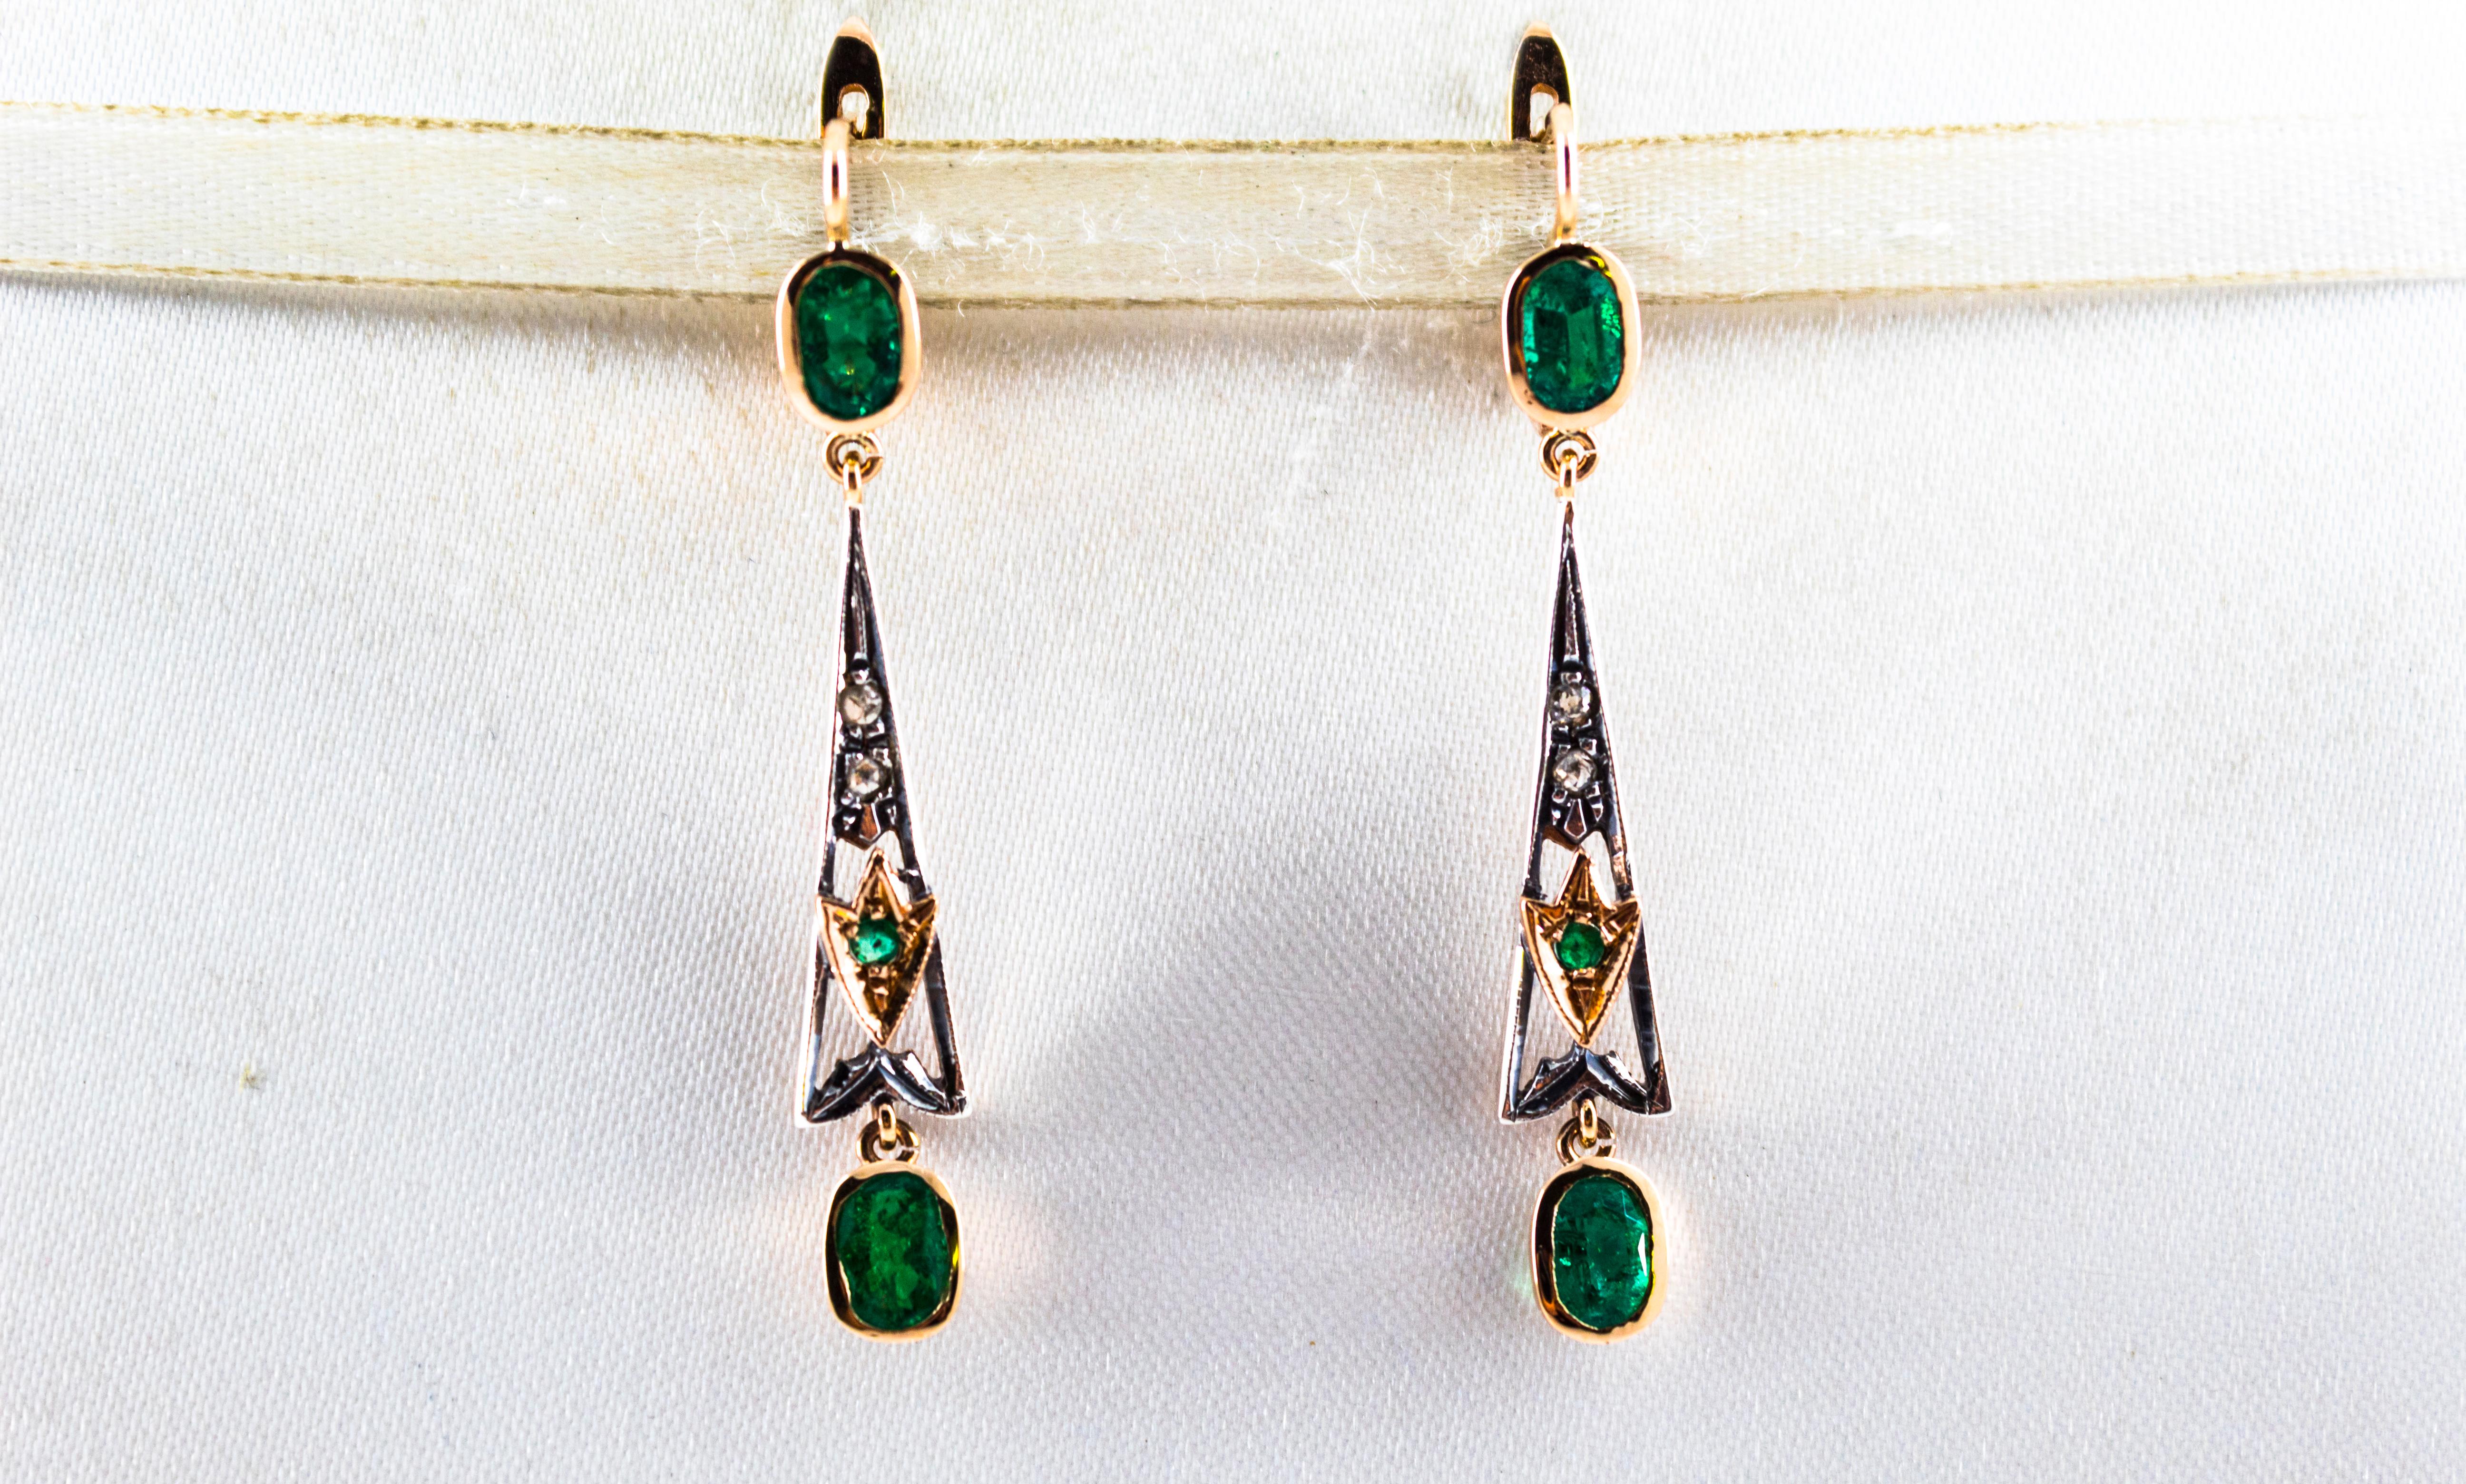 These Lever-Back Earrings are made of 9K Yellow Gold and Sterling Silver.
These Earrings have 0.06 Carats of White Rose Cut Diamonds.
These Earrings have also 2.10 Carat of Emeralds.

These Earrings are available also with Rubies or Blue